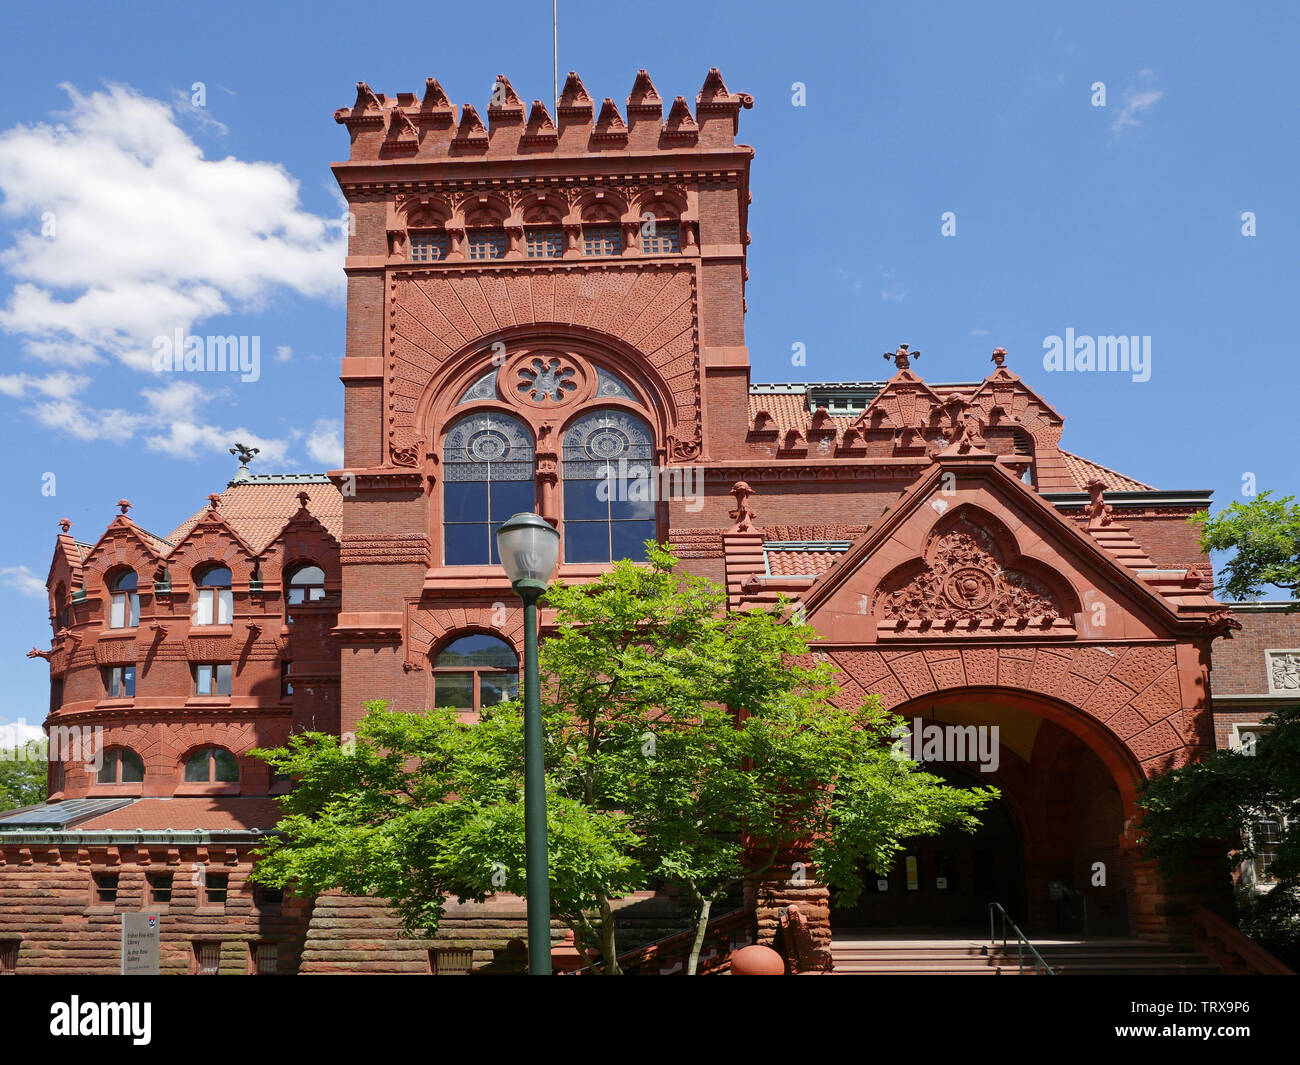 PHILADELPHIA - MAY 2019:  The Fisher Fine Arts Library at the University of Pennsylvania, built 1890, is a National Historic Landmark. Stock Photo